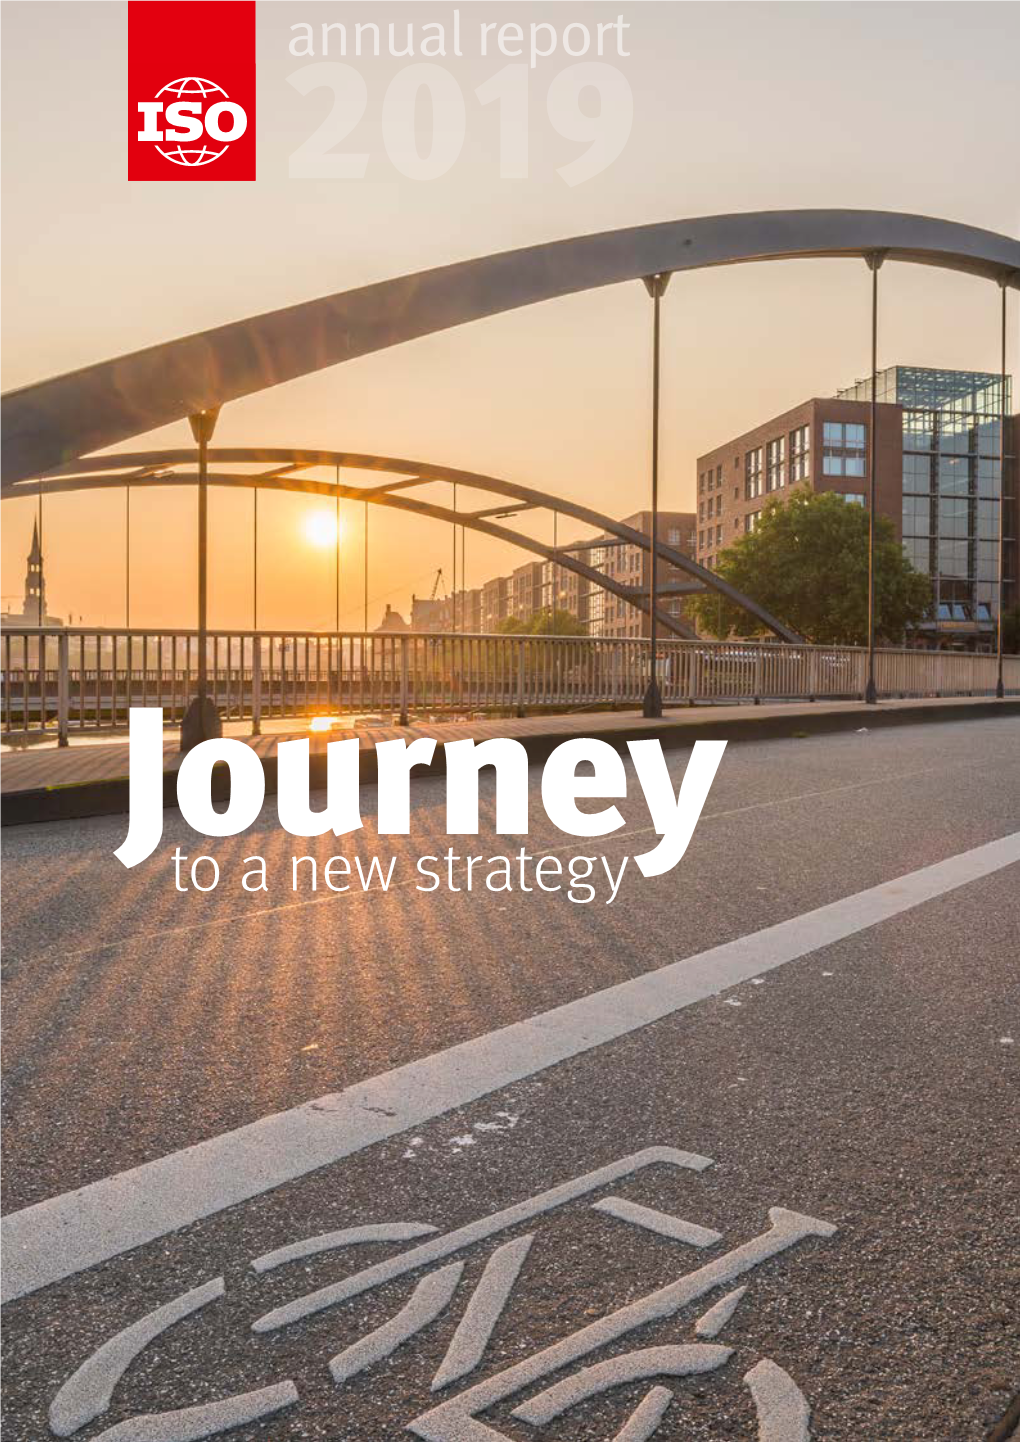 Annual Report 2019 "Journey to a New Strategy"